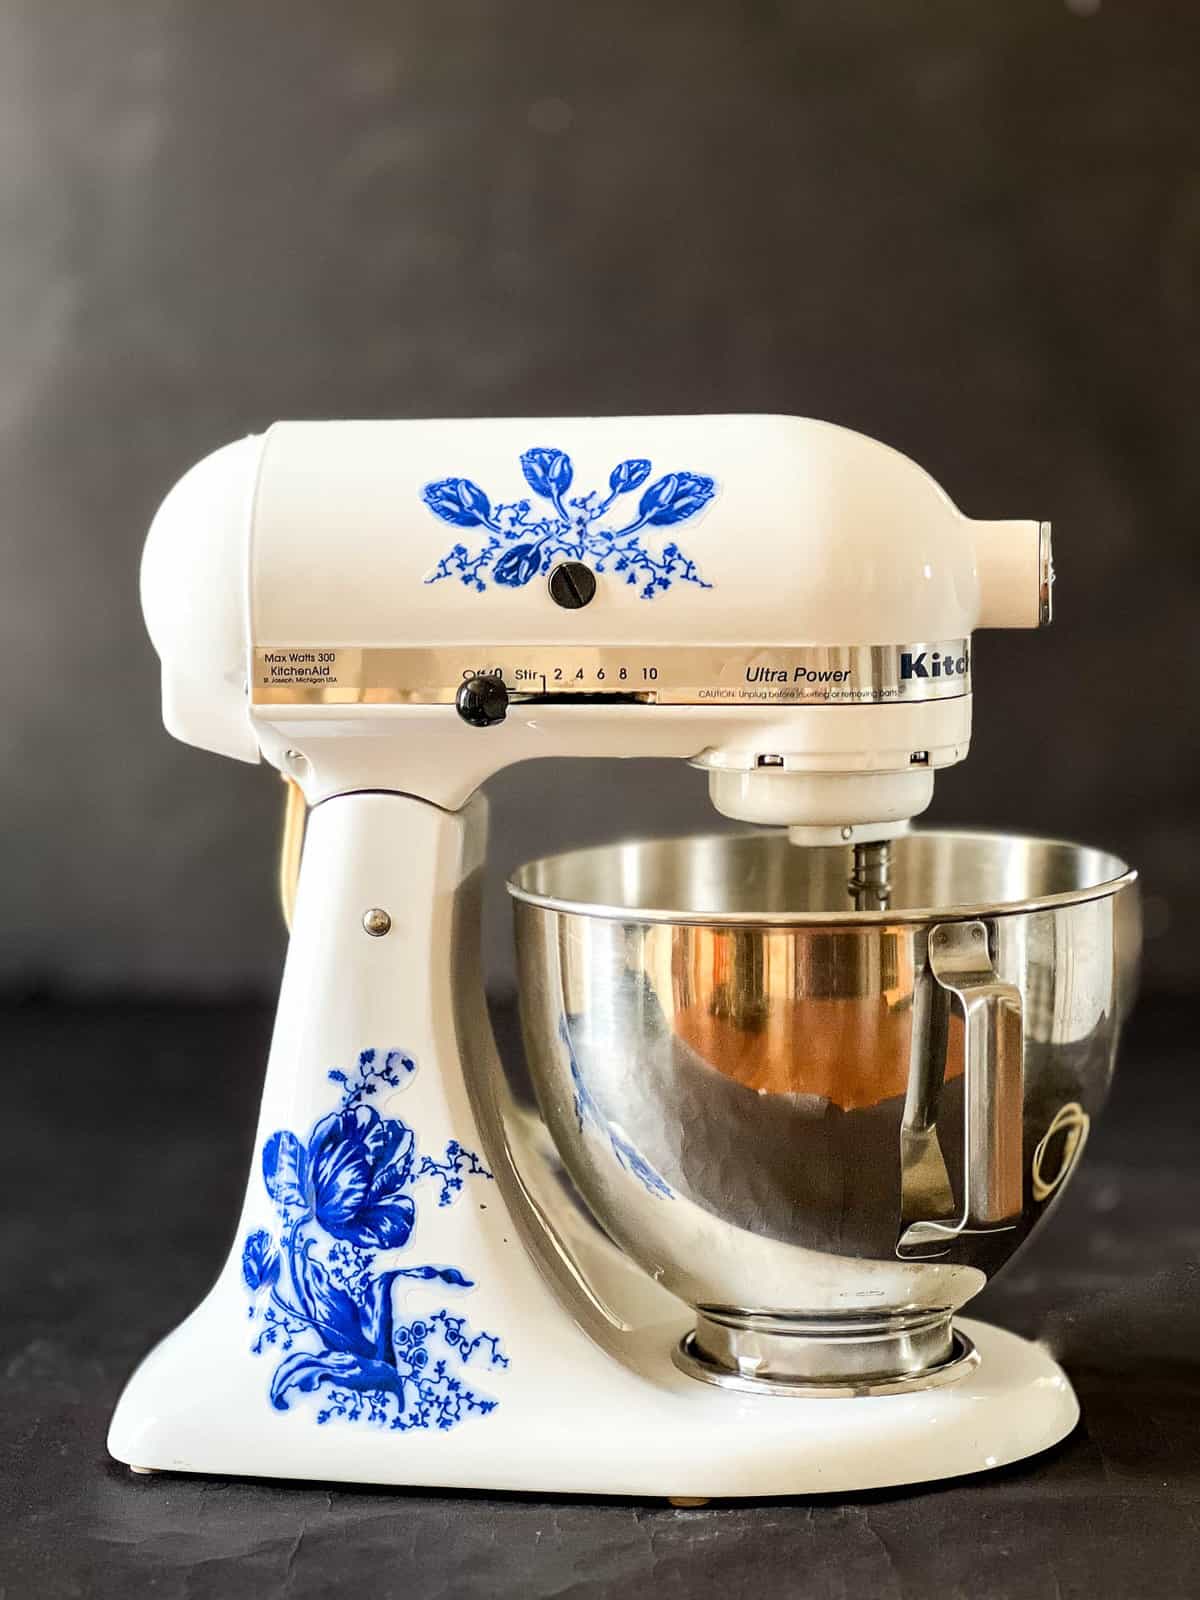 Blue and white decal on stand mixer.